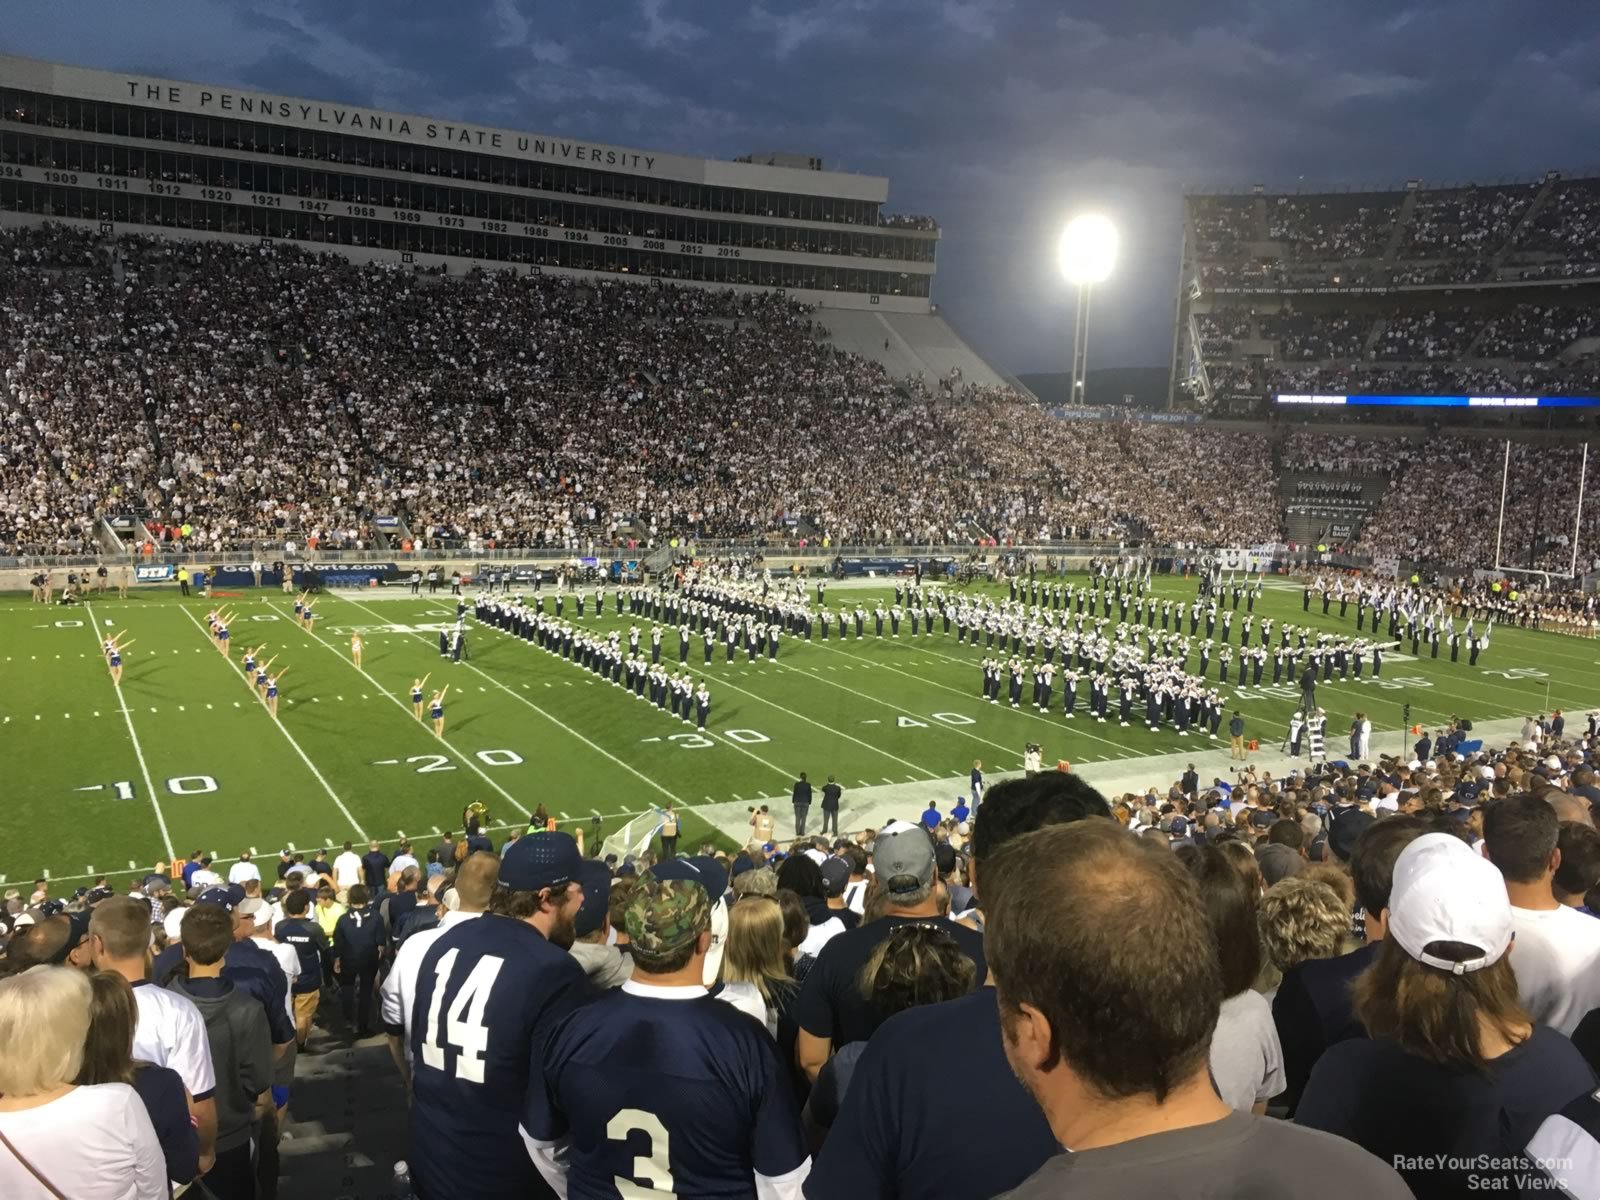 section wh, row 25 seat view  - beaver stadium